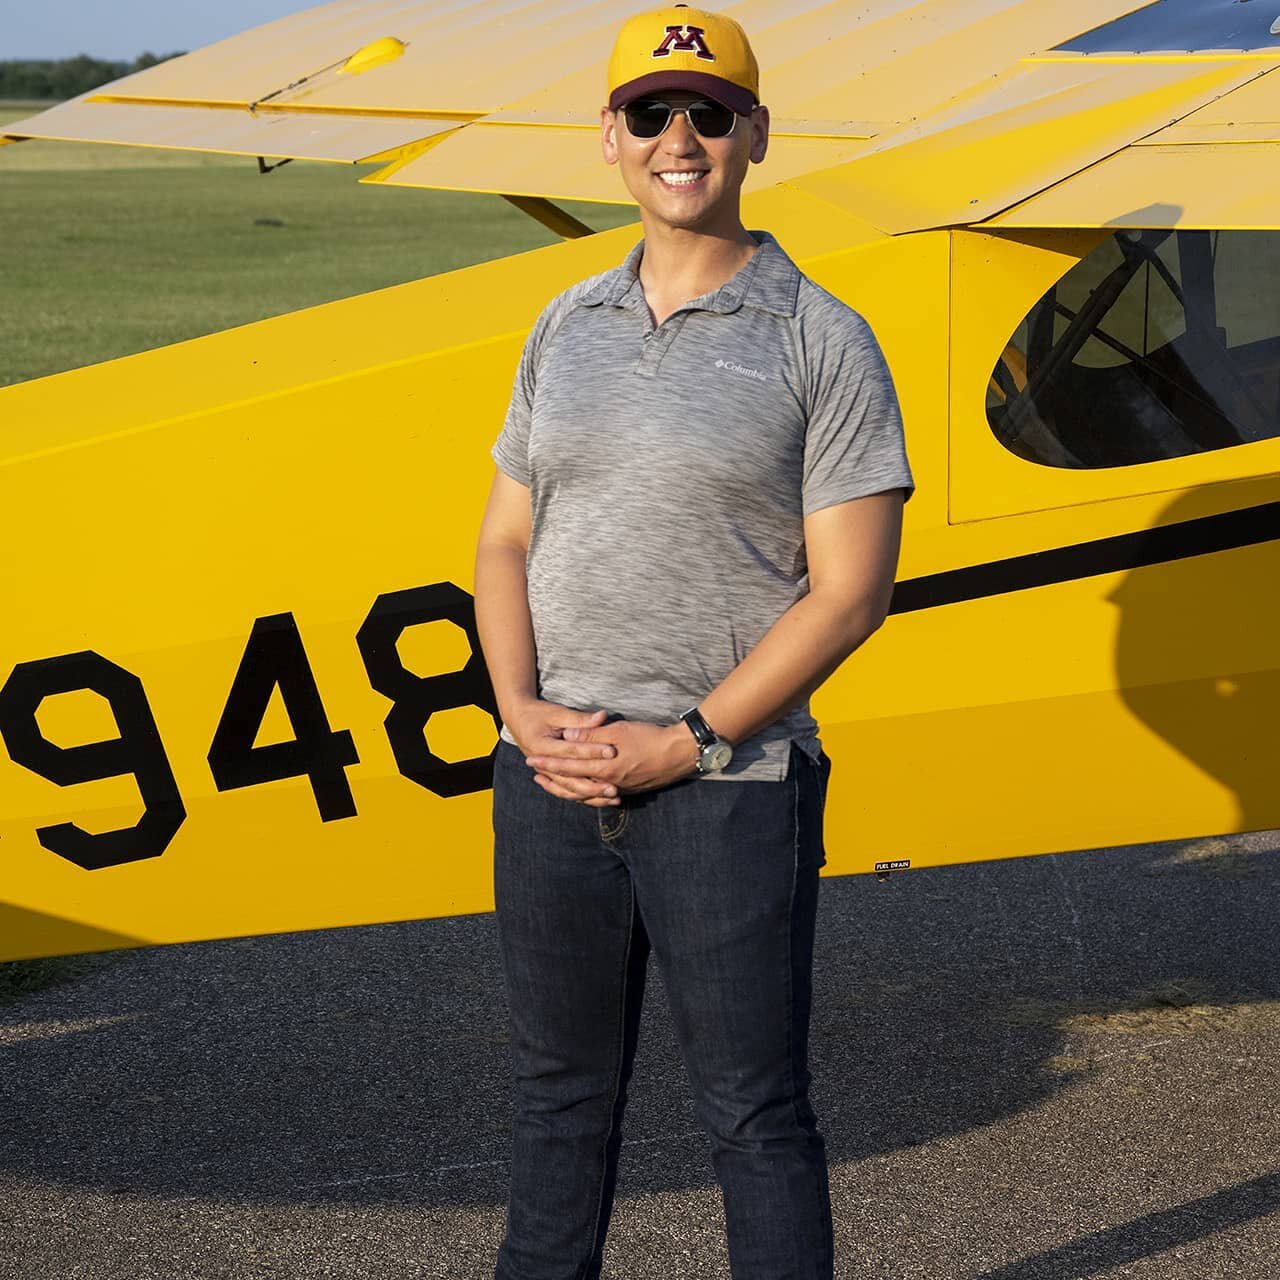 Congratulations to Douglas Learmont for finishing his tailwheel endorsement last evening!